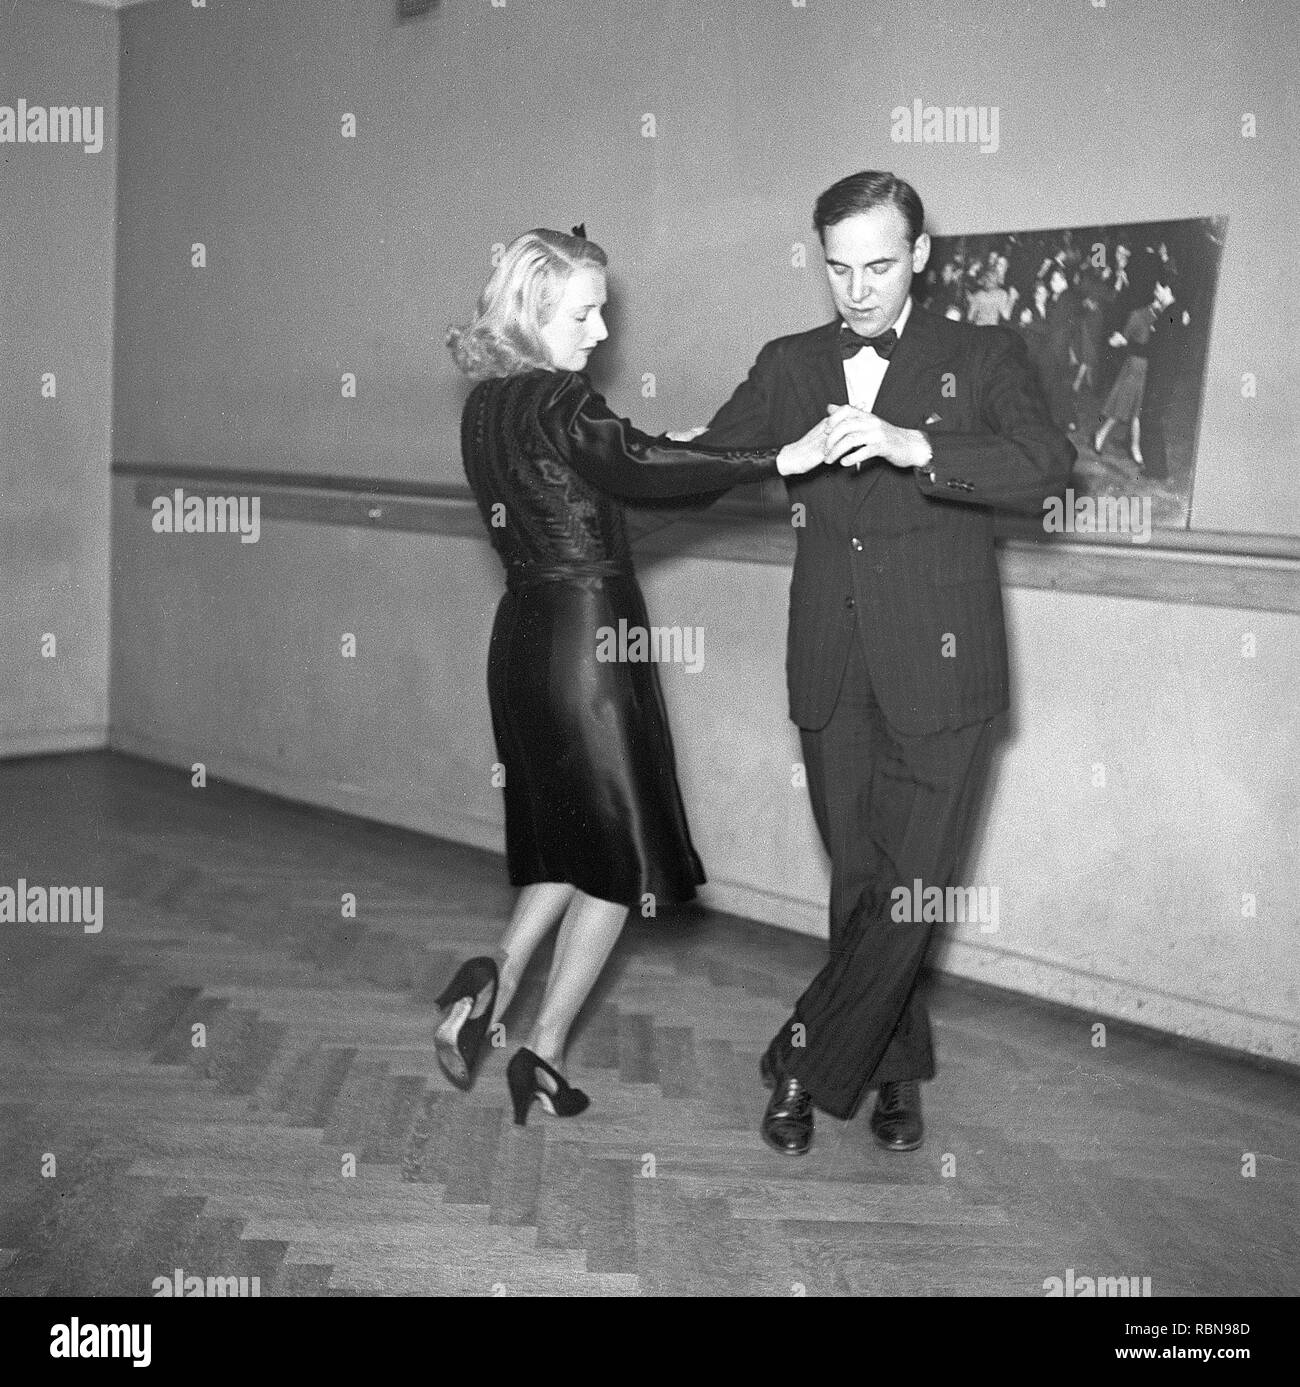 Dancing in the 1940s. A dancing couple in the 1940s. The elegant couple are training their dance steps at a dance school. Photo Kristoffersson Ref B3-1. Sweden 1943 Stock Photo